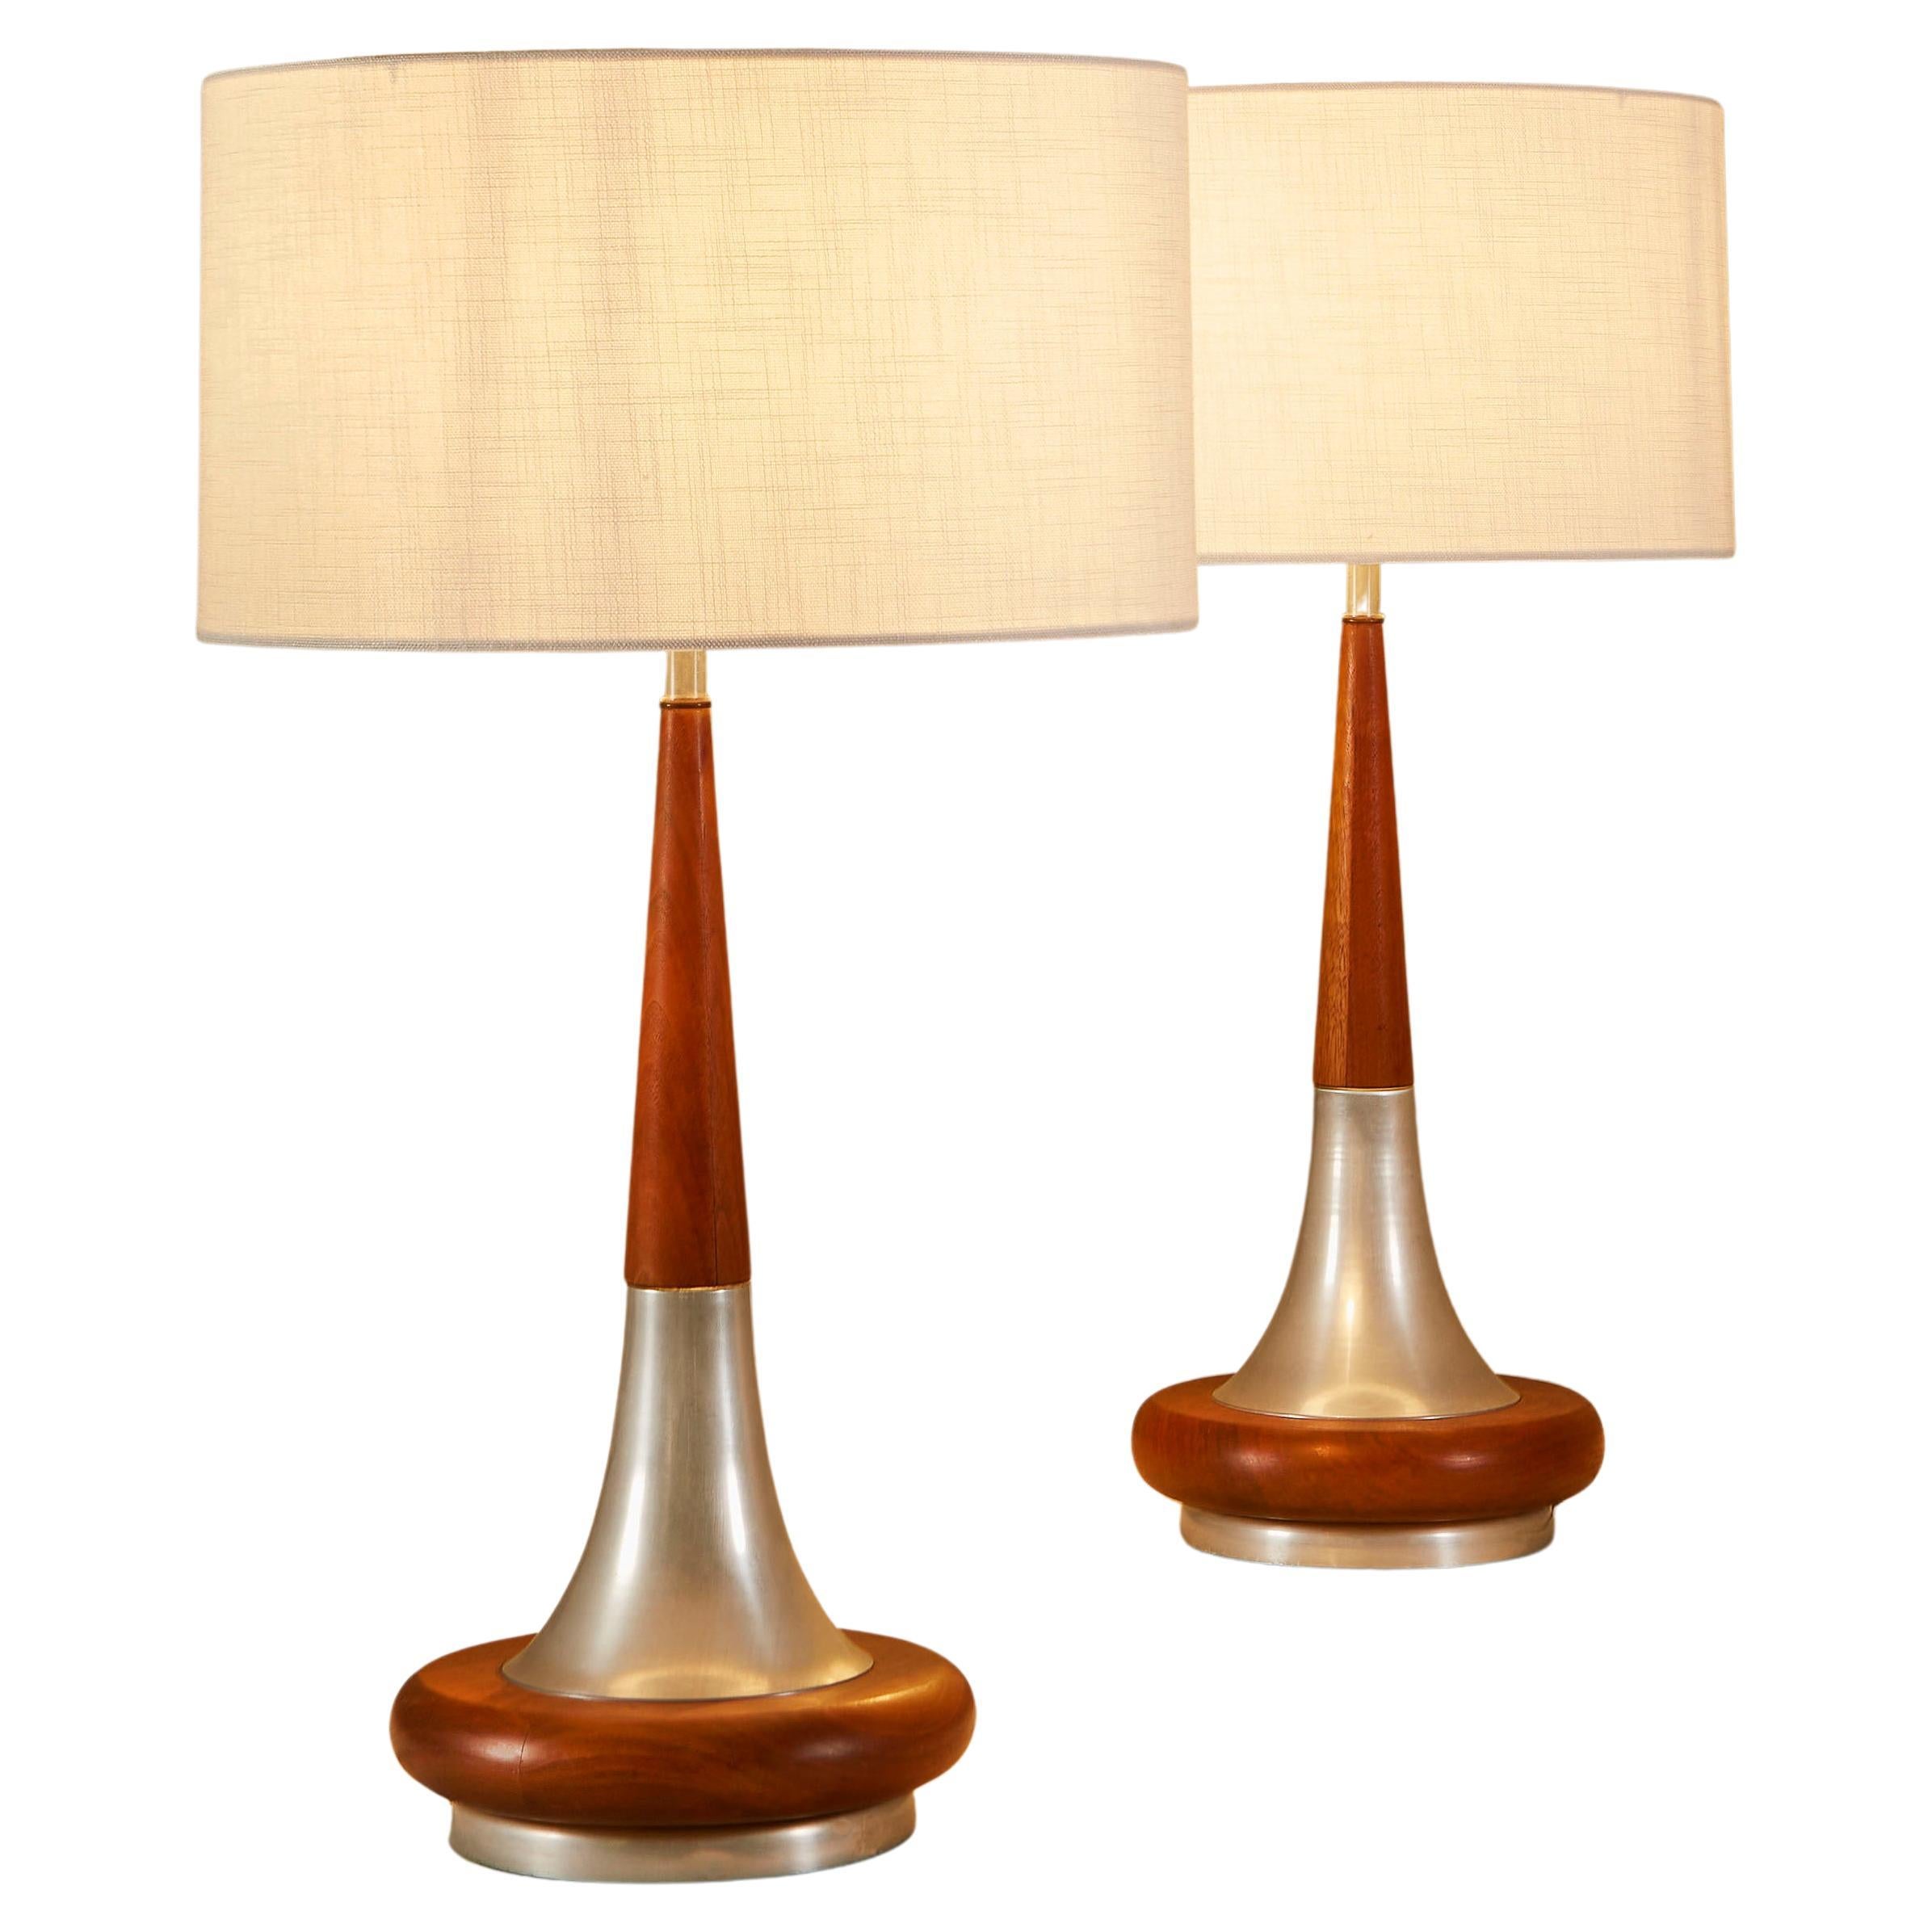 Pair of Tall Mid-Century Modern American Walnut and Chrome Table Lamps